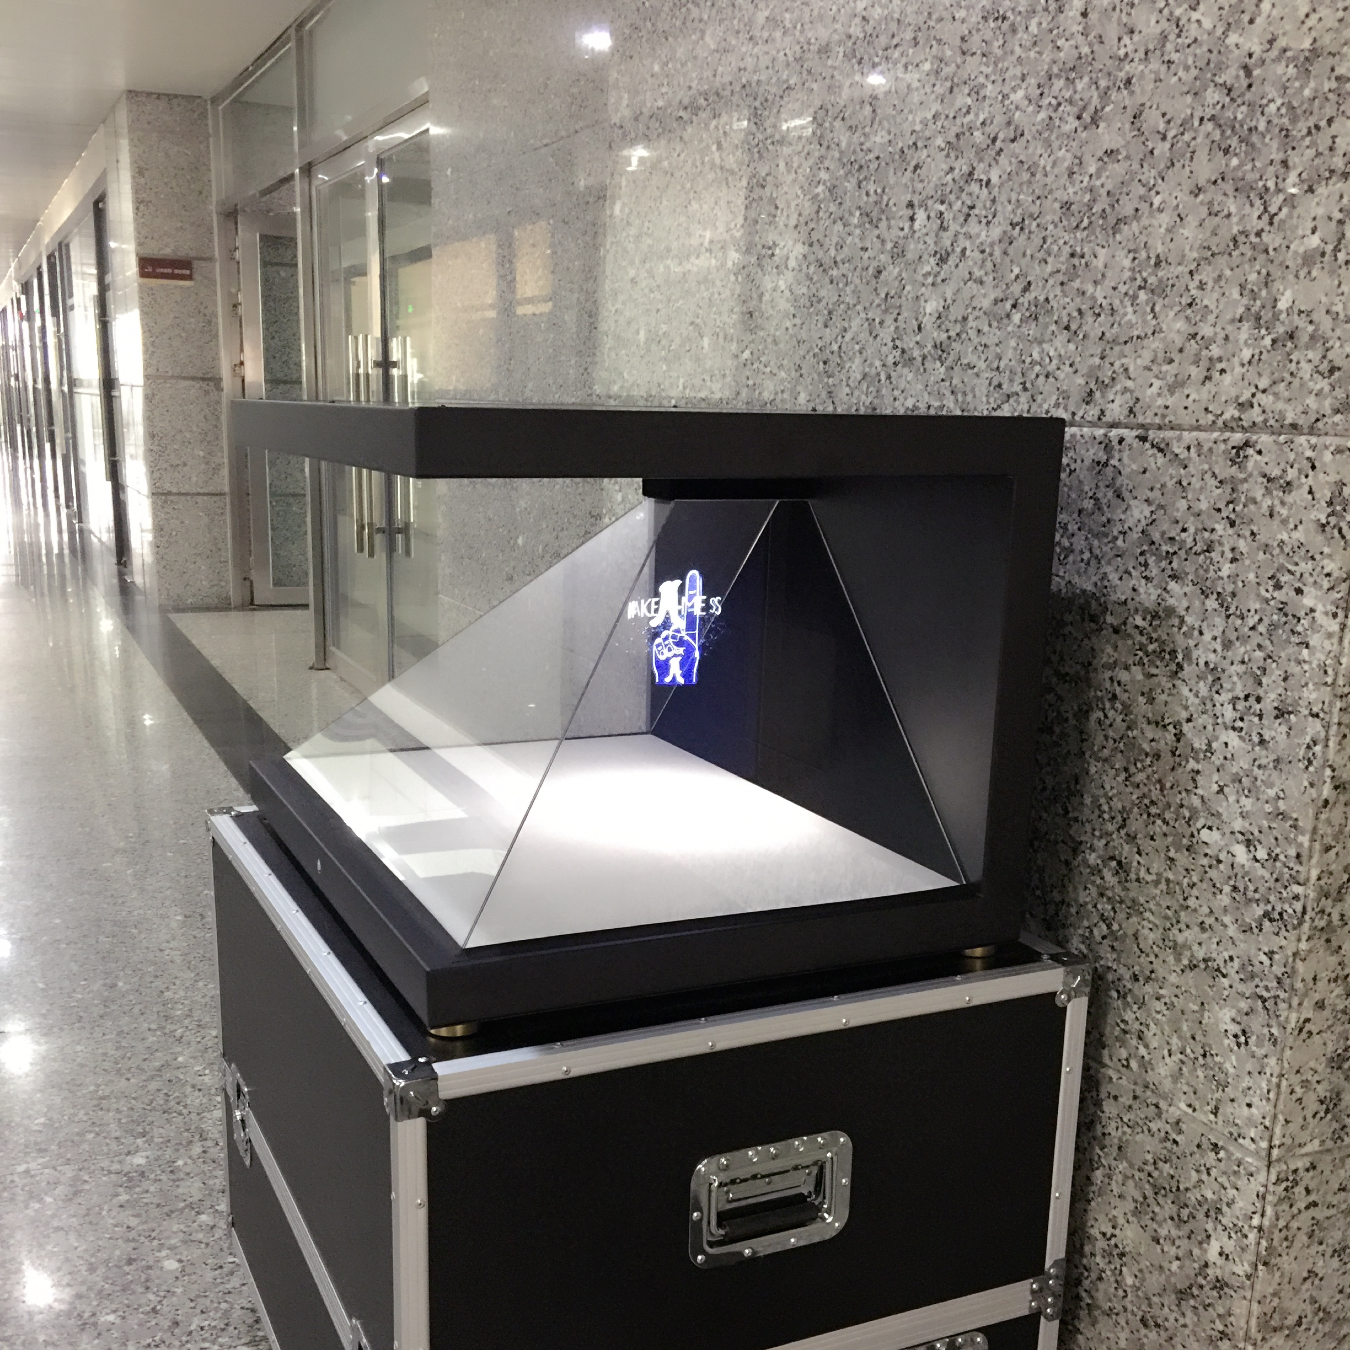 270°FULL HD 3D Holographic Pyramid Display Showcase for jewelry